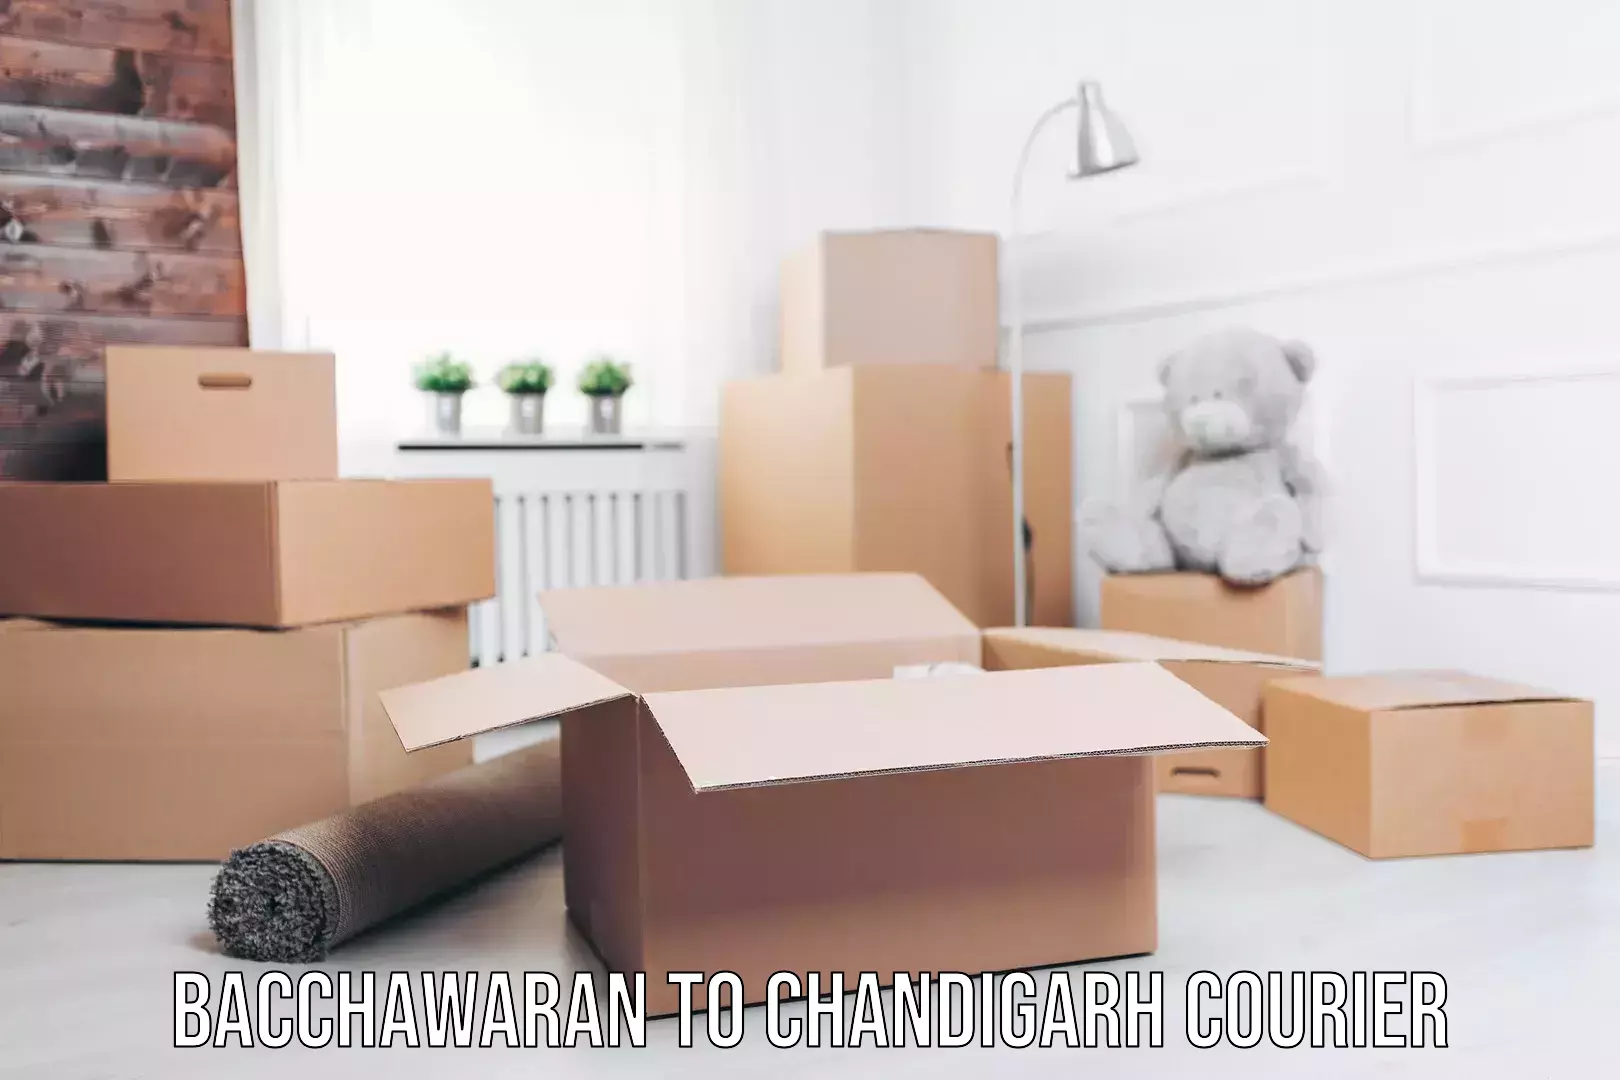 Enhanced tracking features Bacchawaran to Chandigarh